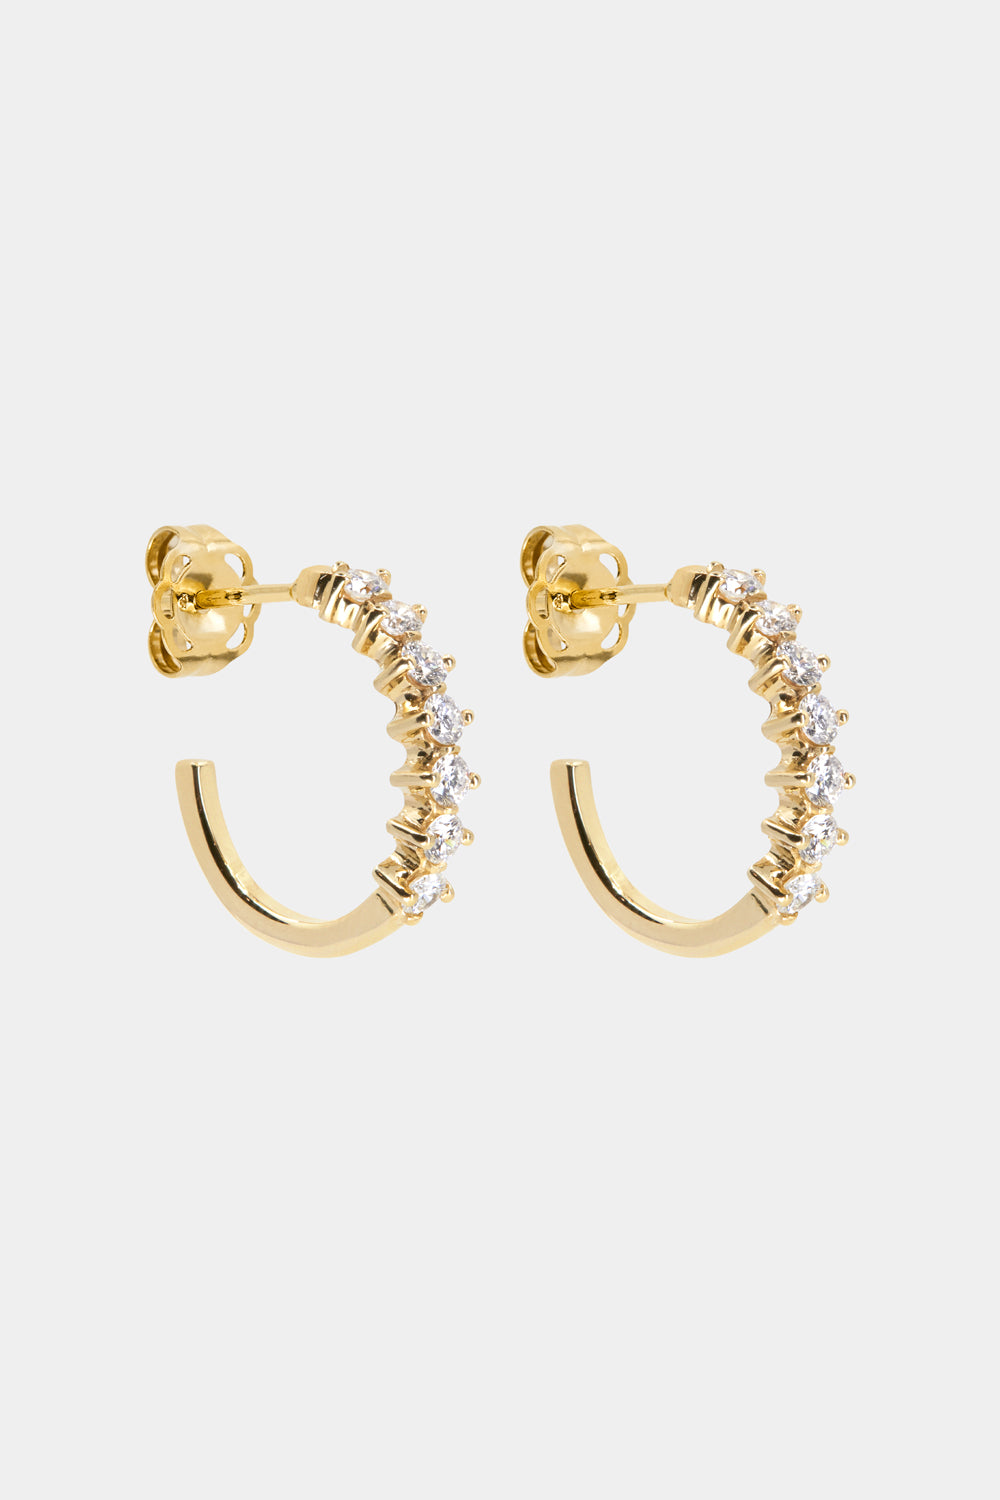 Buttercup Diamond Hoops | Yellow Gold, More Options Available